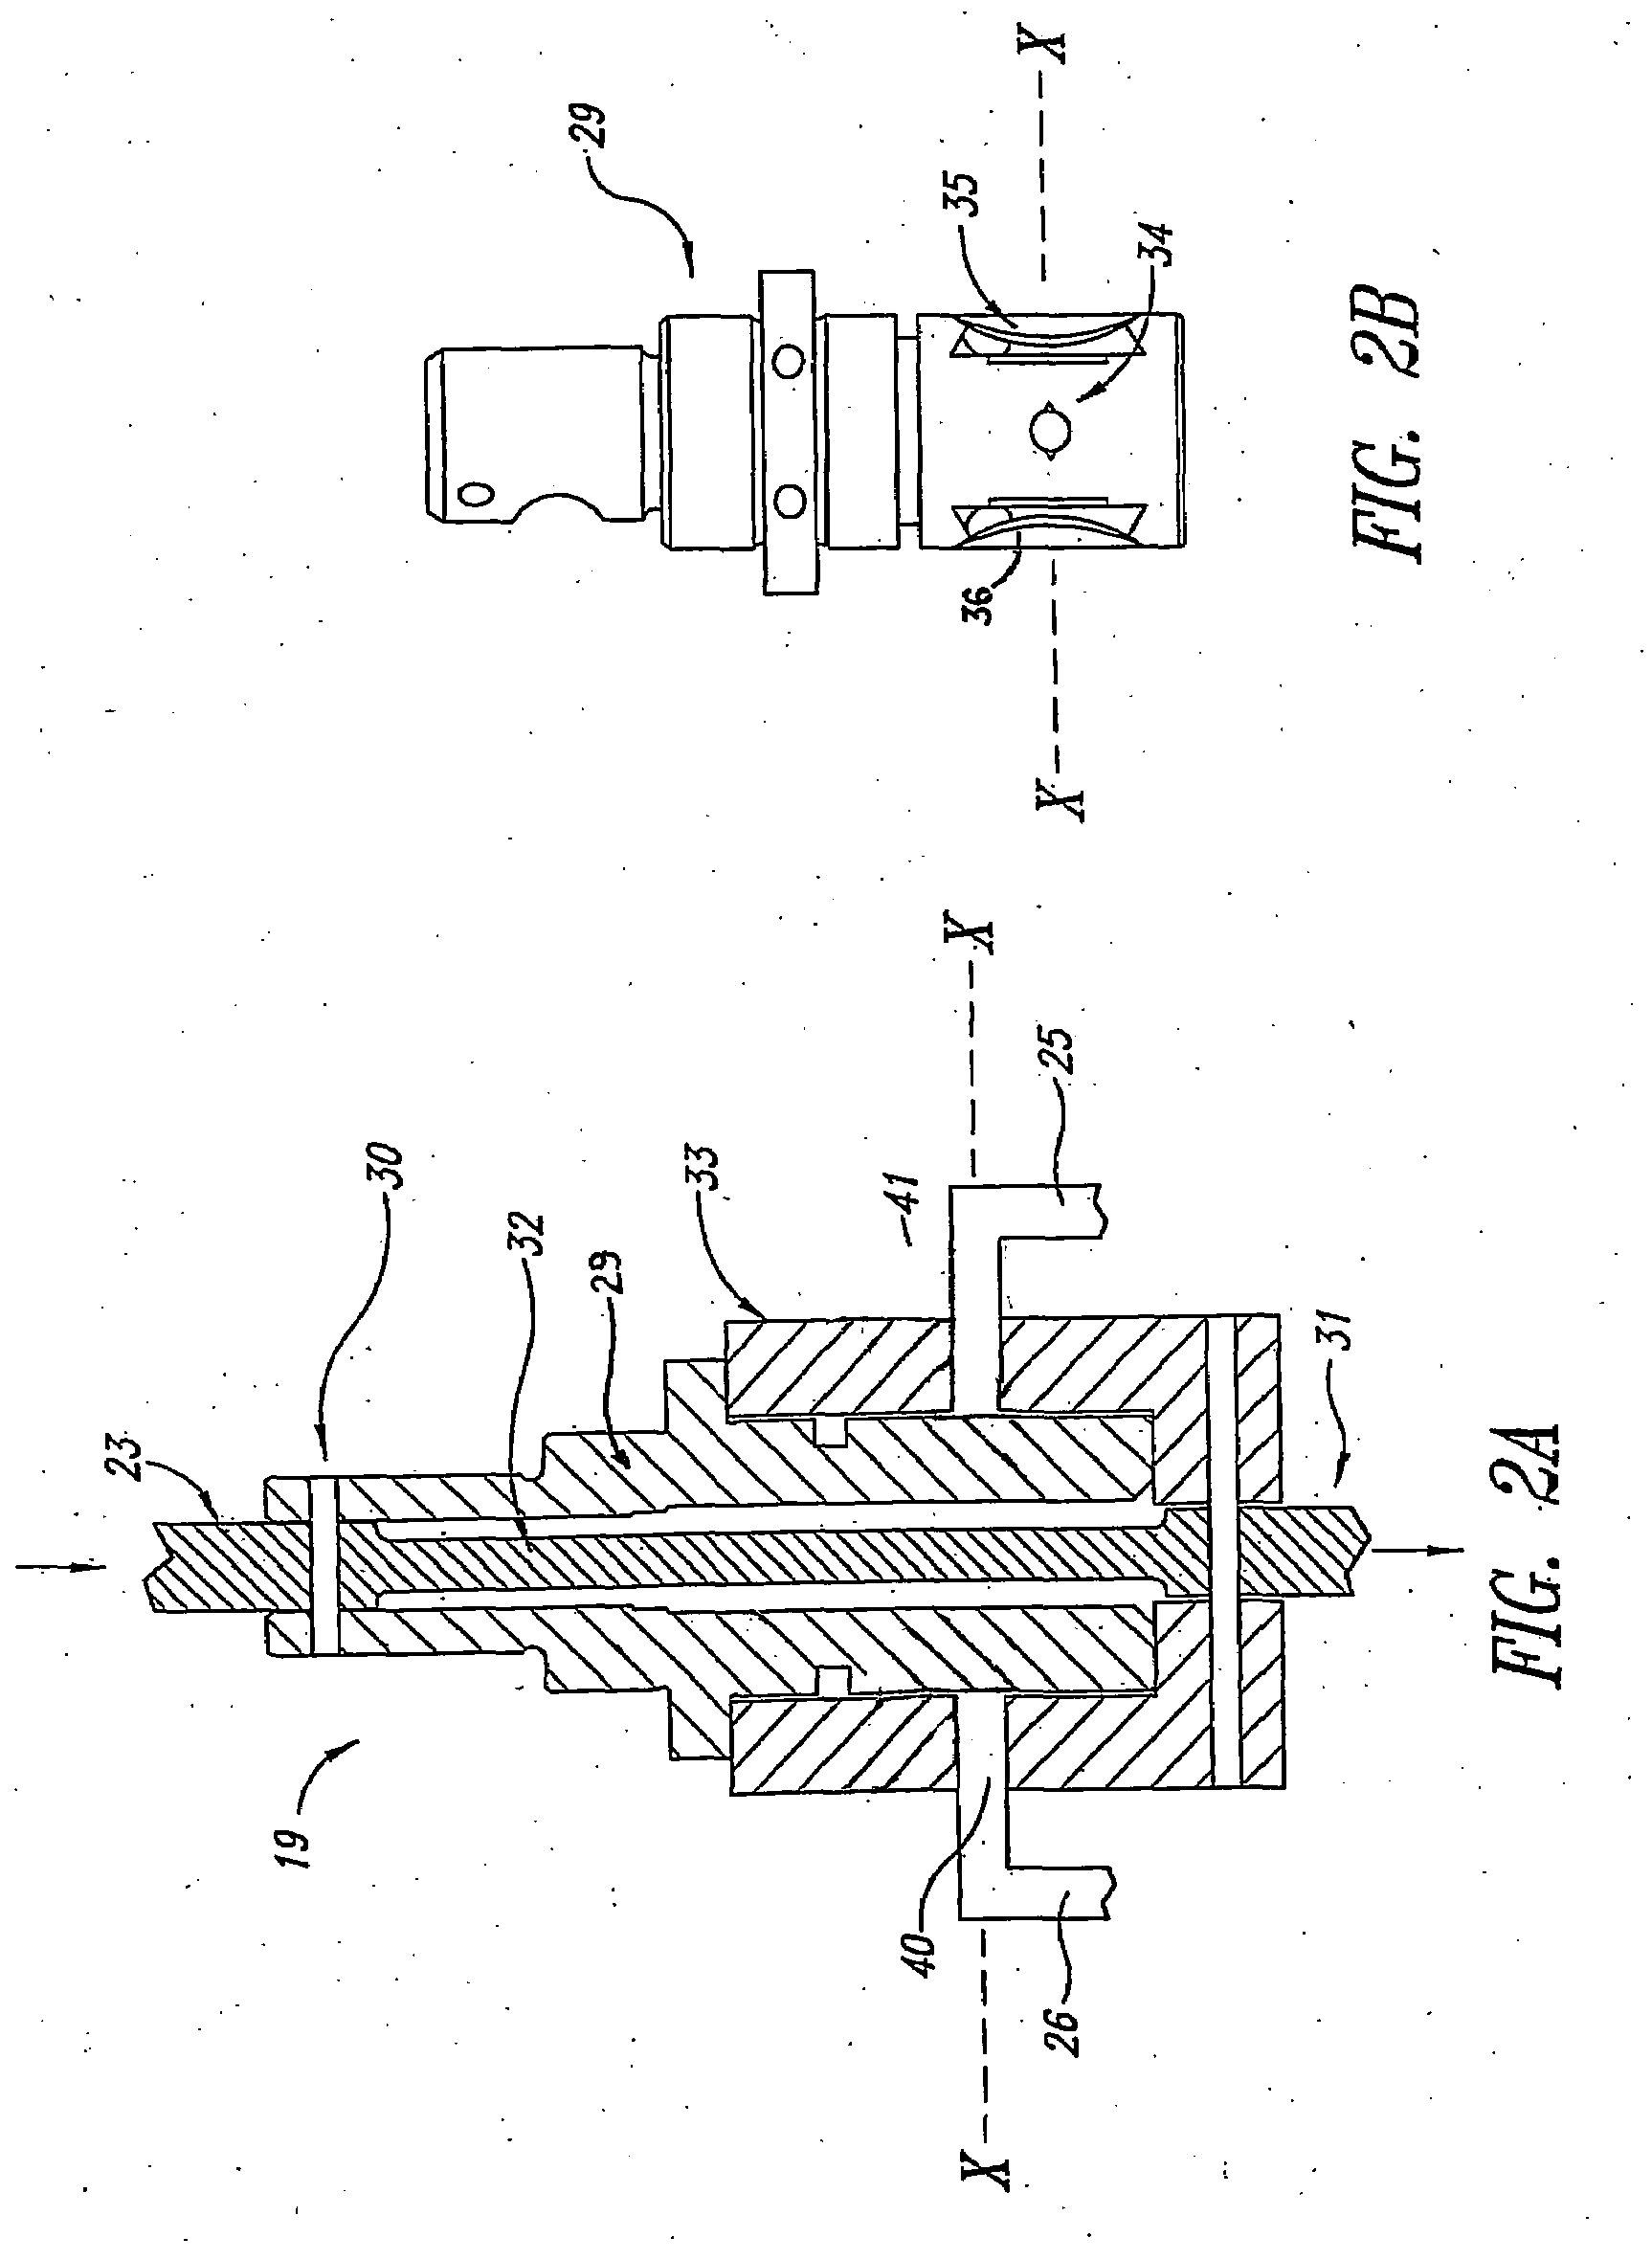 Engine-off power steering system